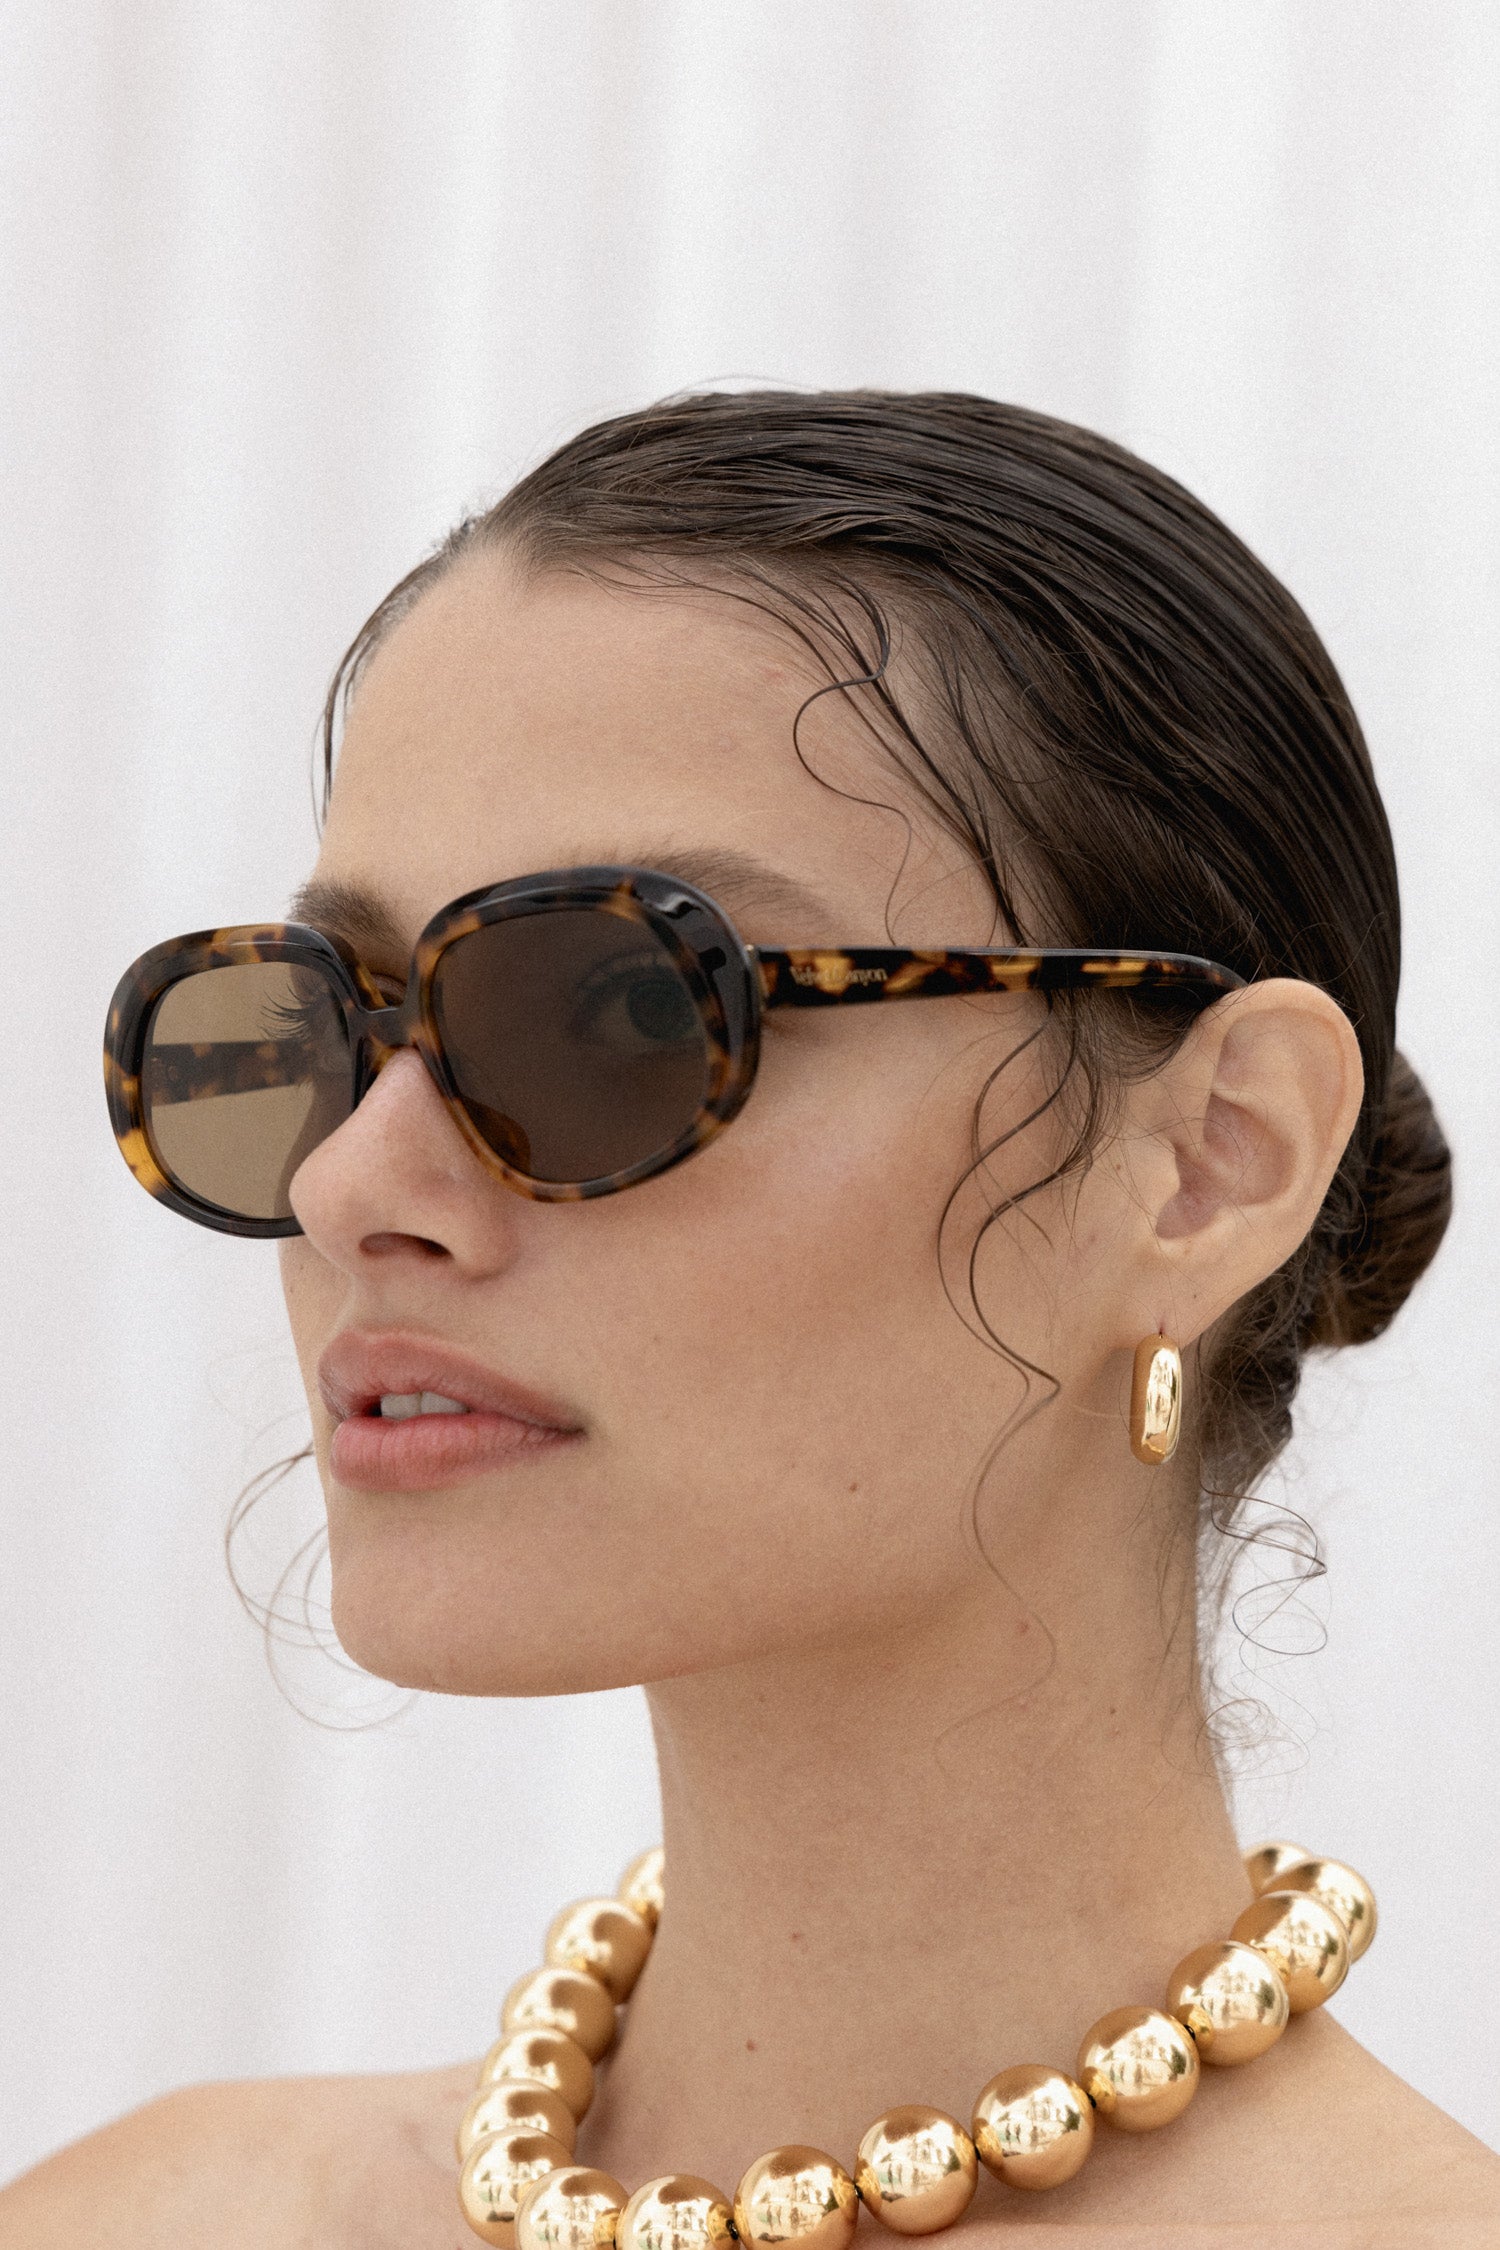 The Heirlooms Sunglasses